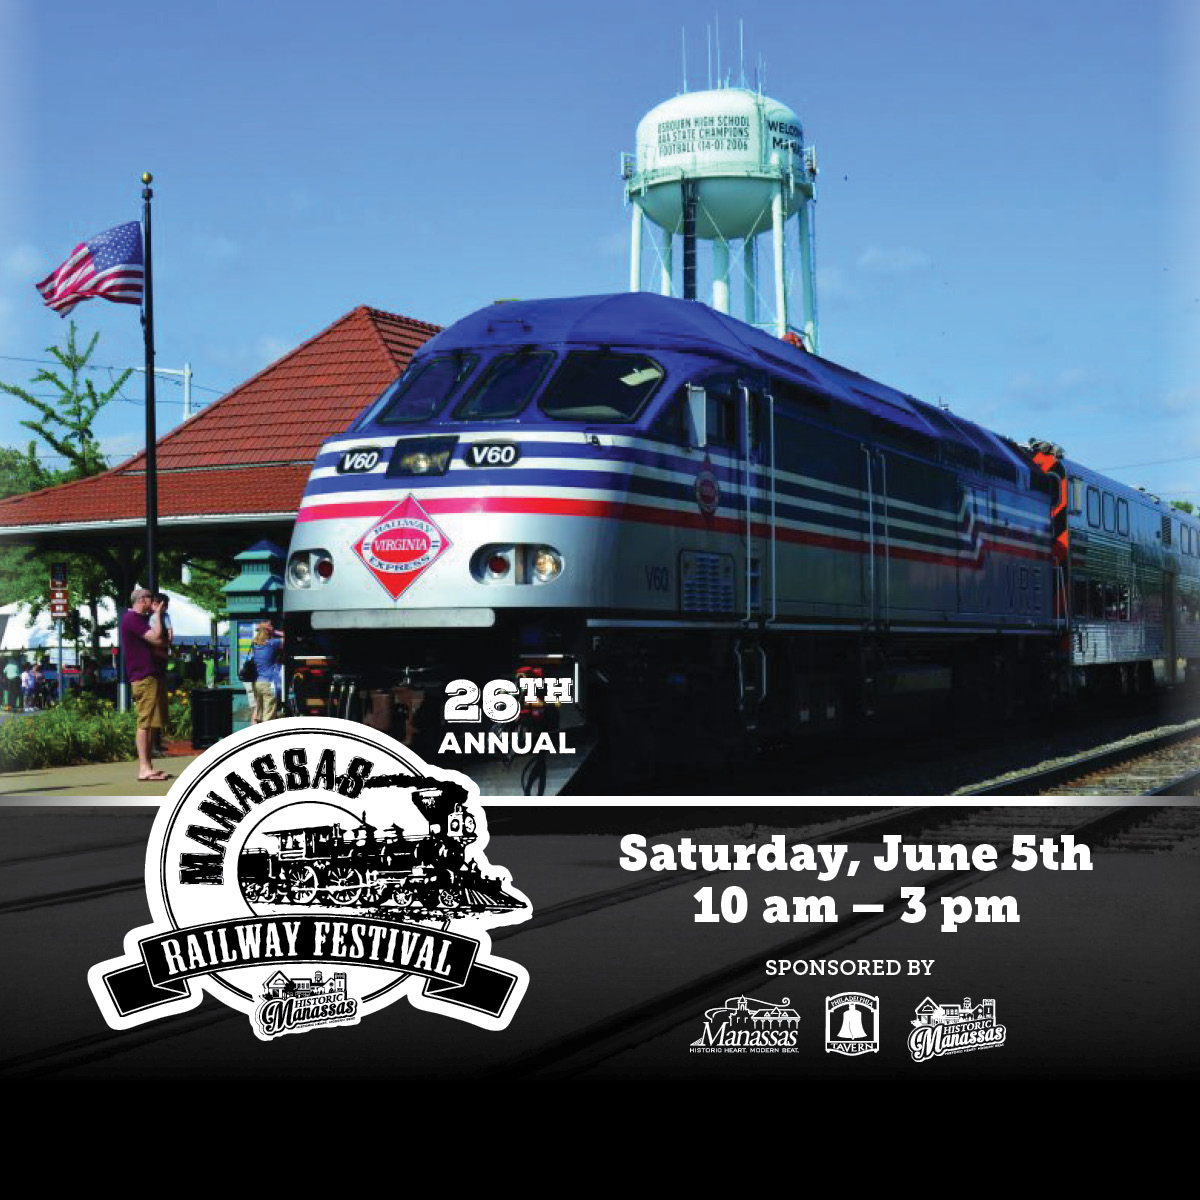 The Manassas Railway Festival is Coming Down the Line June 5, 2021